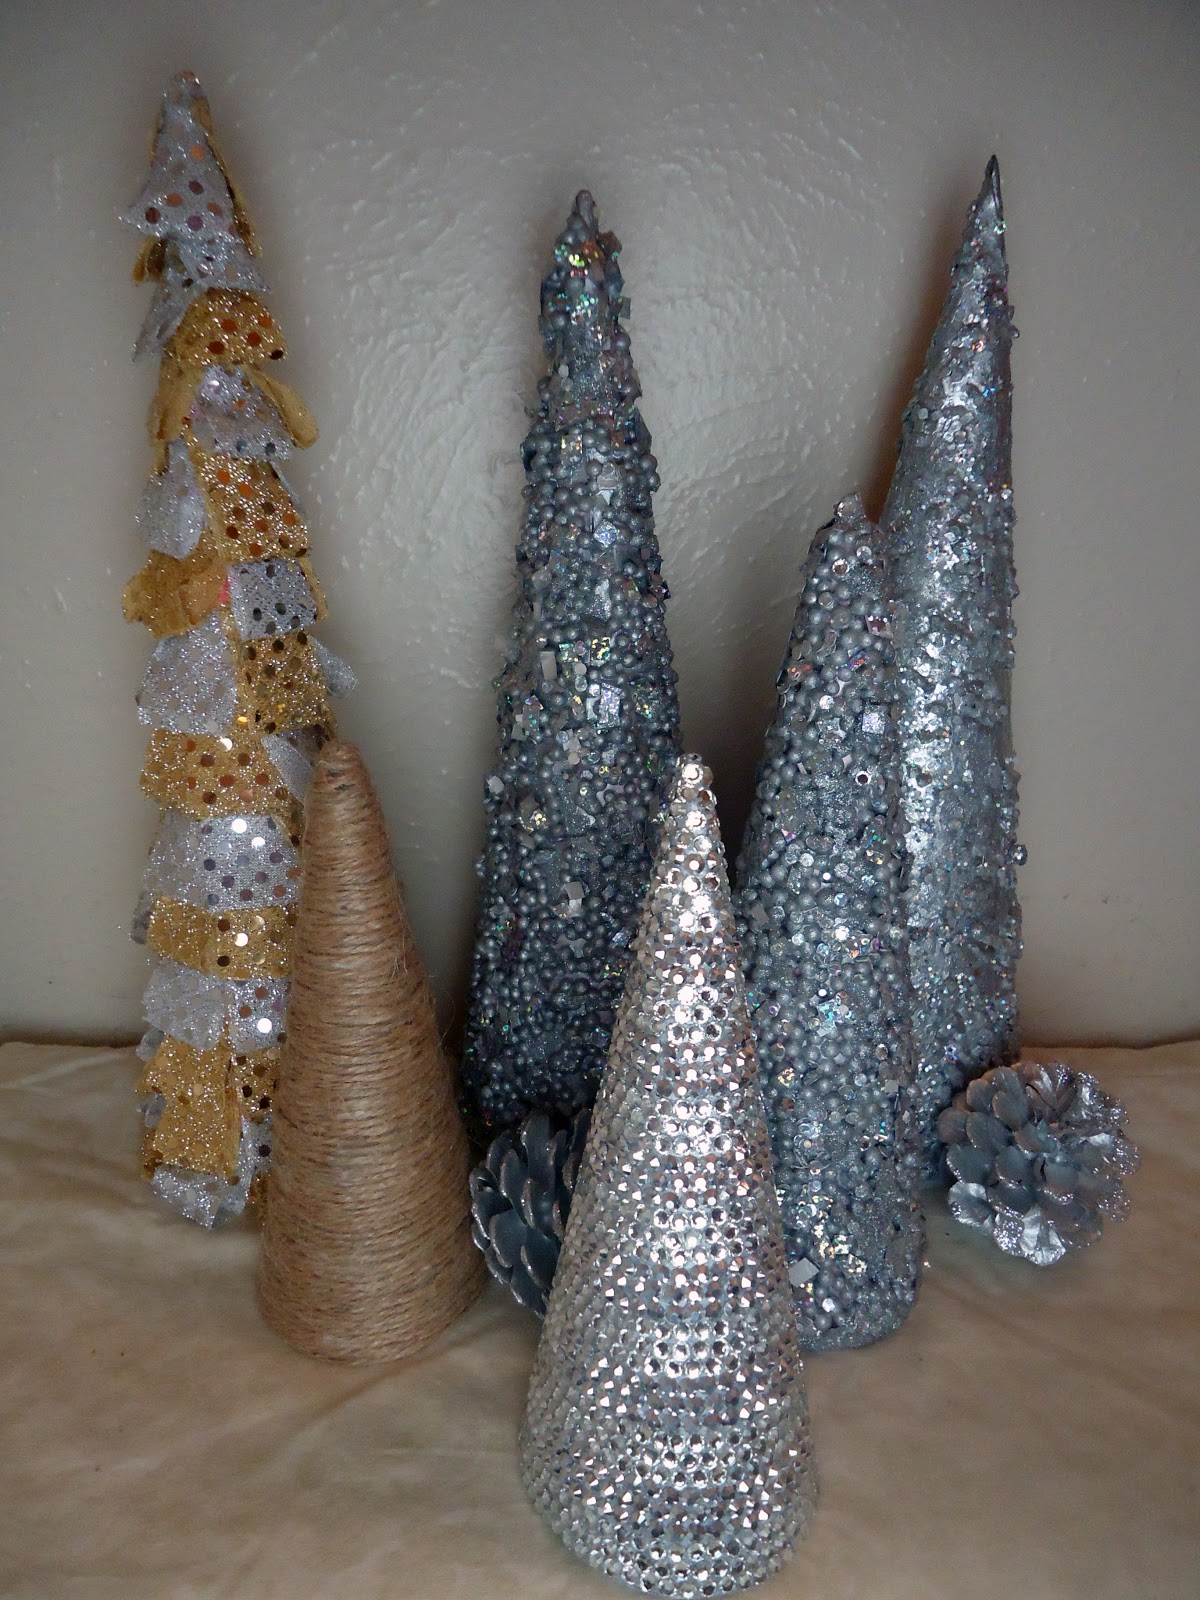 Frugal Home Design DIY Cone Shaped Christmas Trees